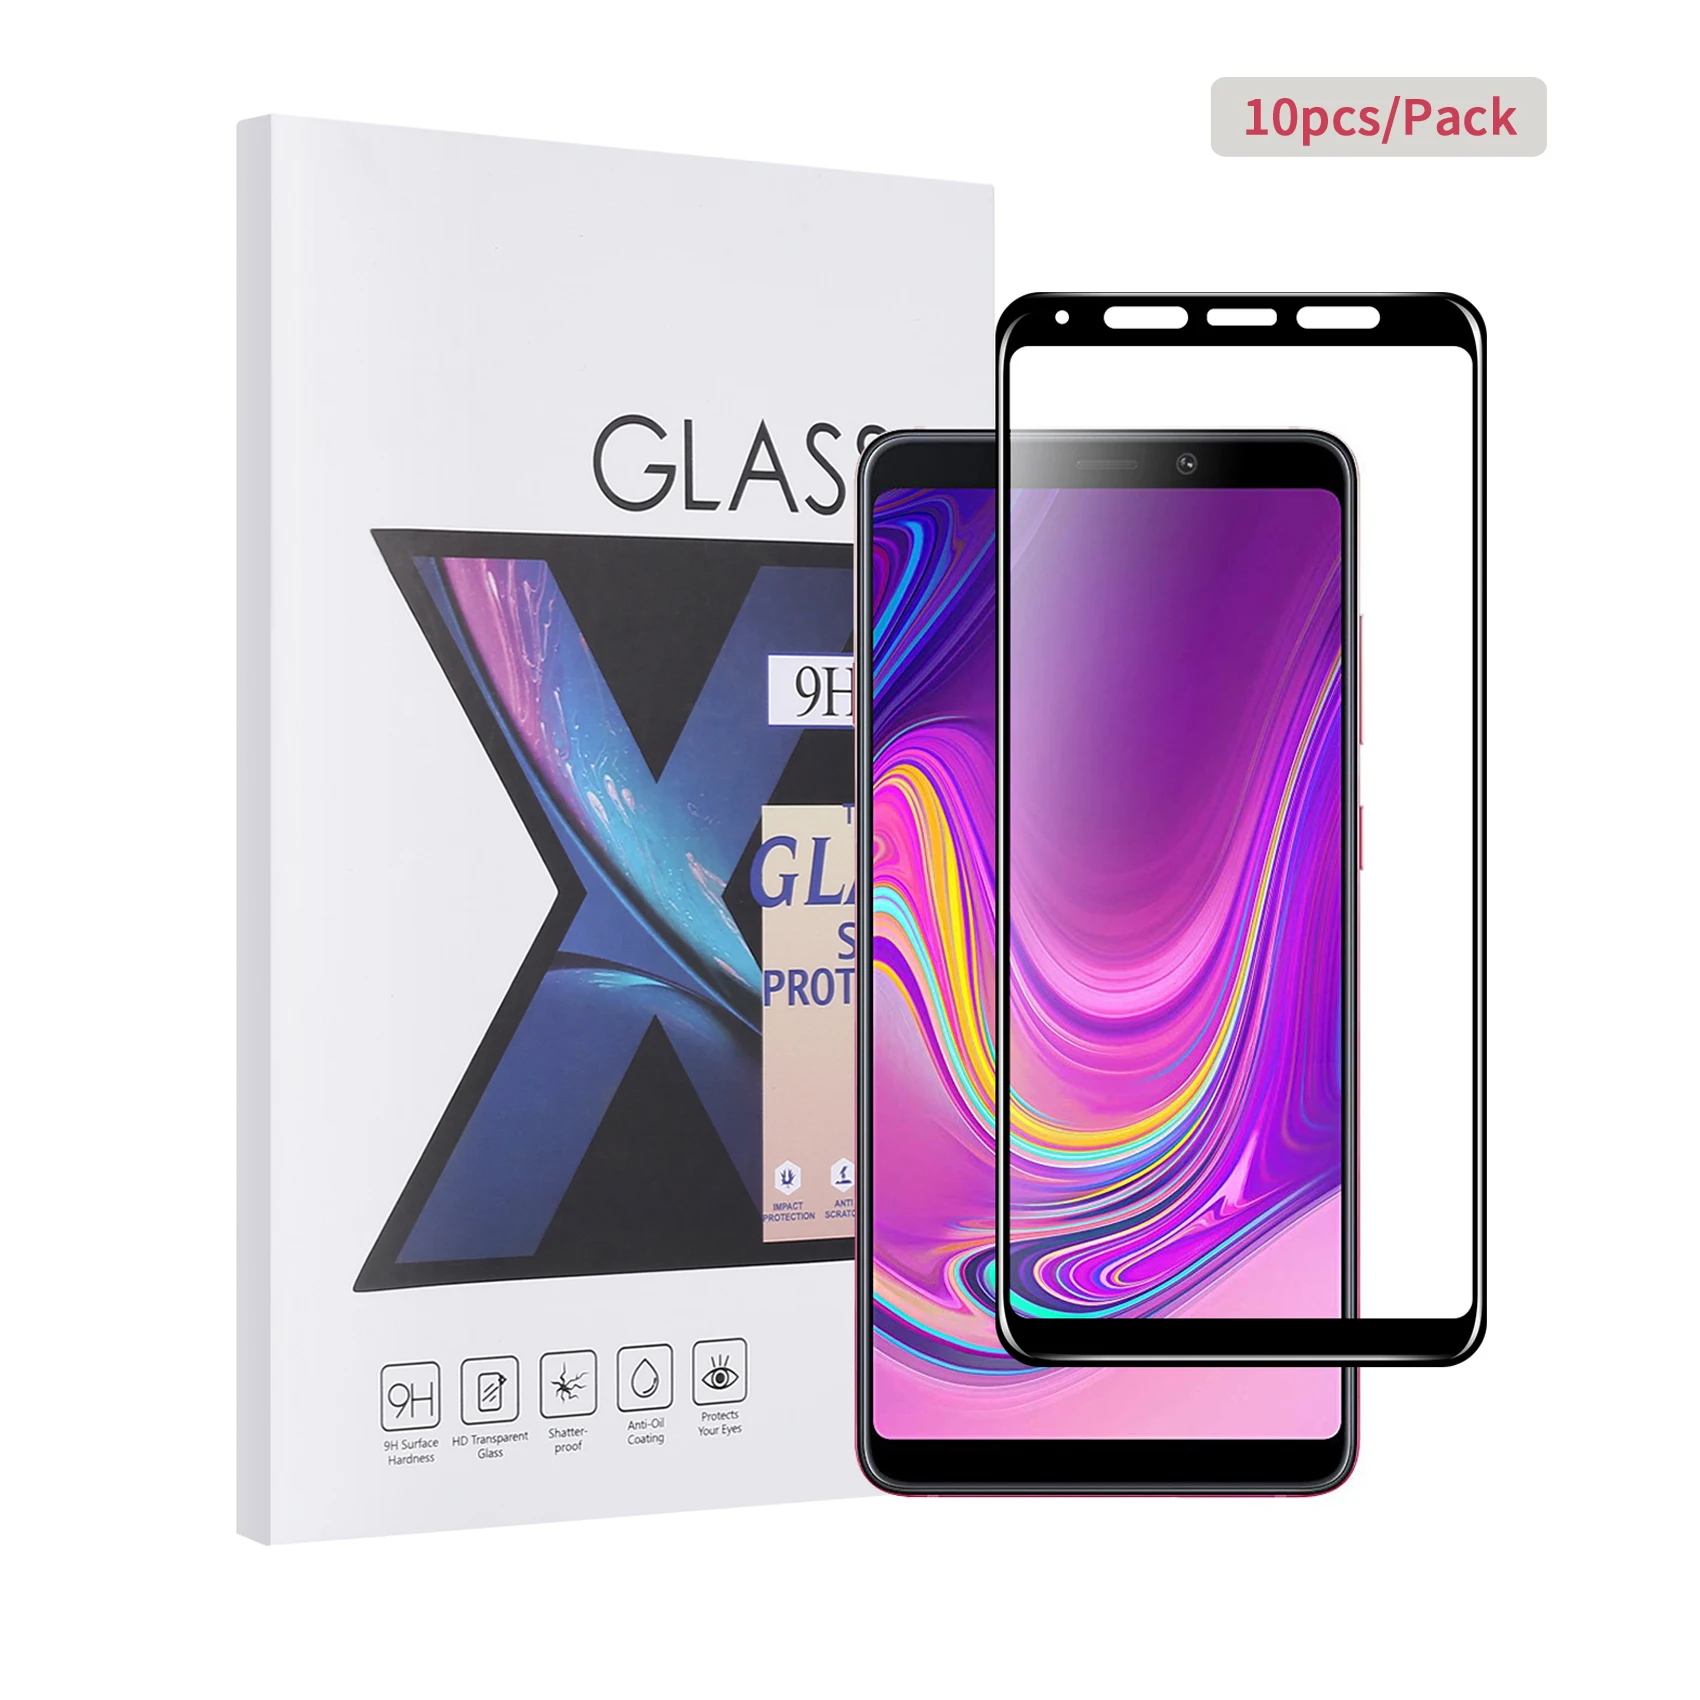 

10pcs Latest Screen Protector for Samsung Galaxy A9 (2018) tempered glass film 9H high hardness [Lastest curved edge]